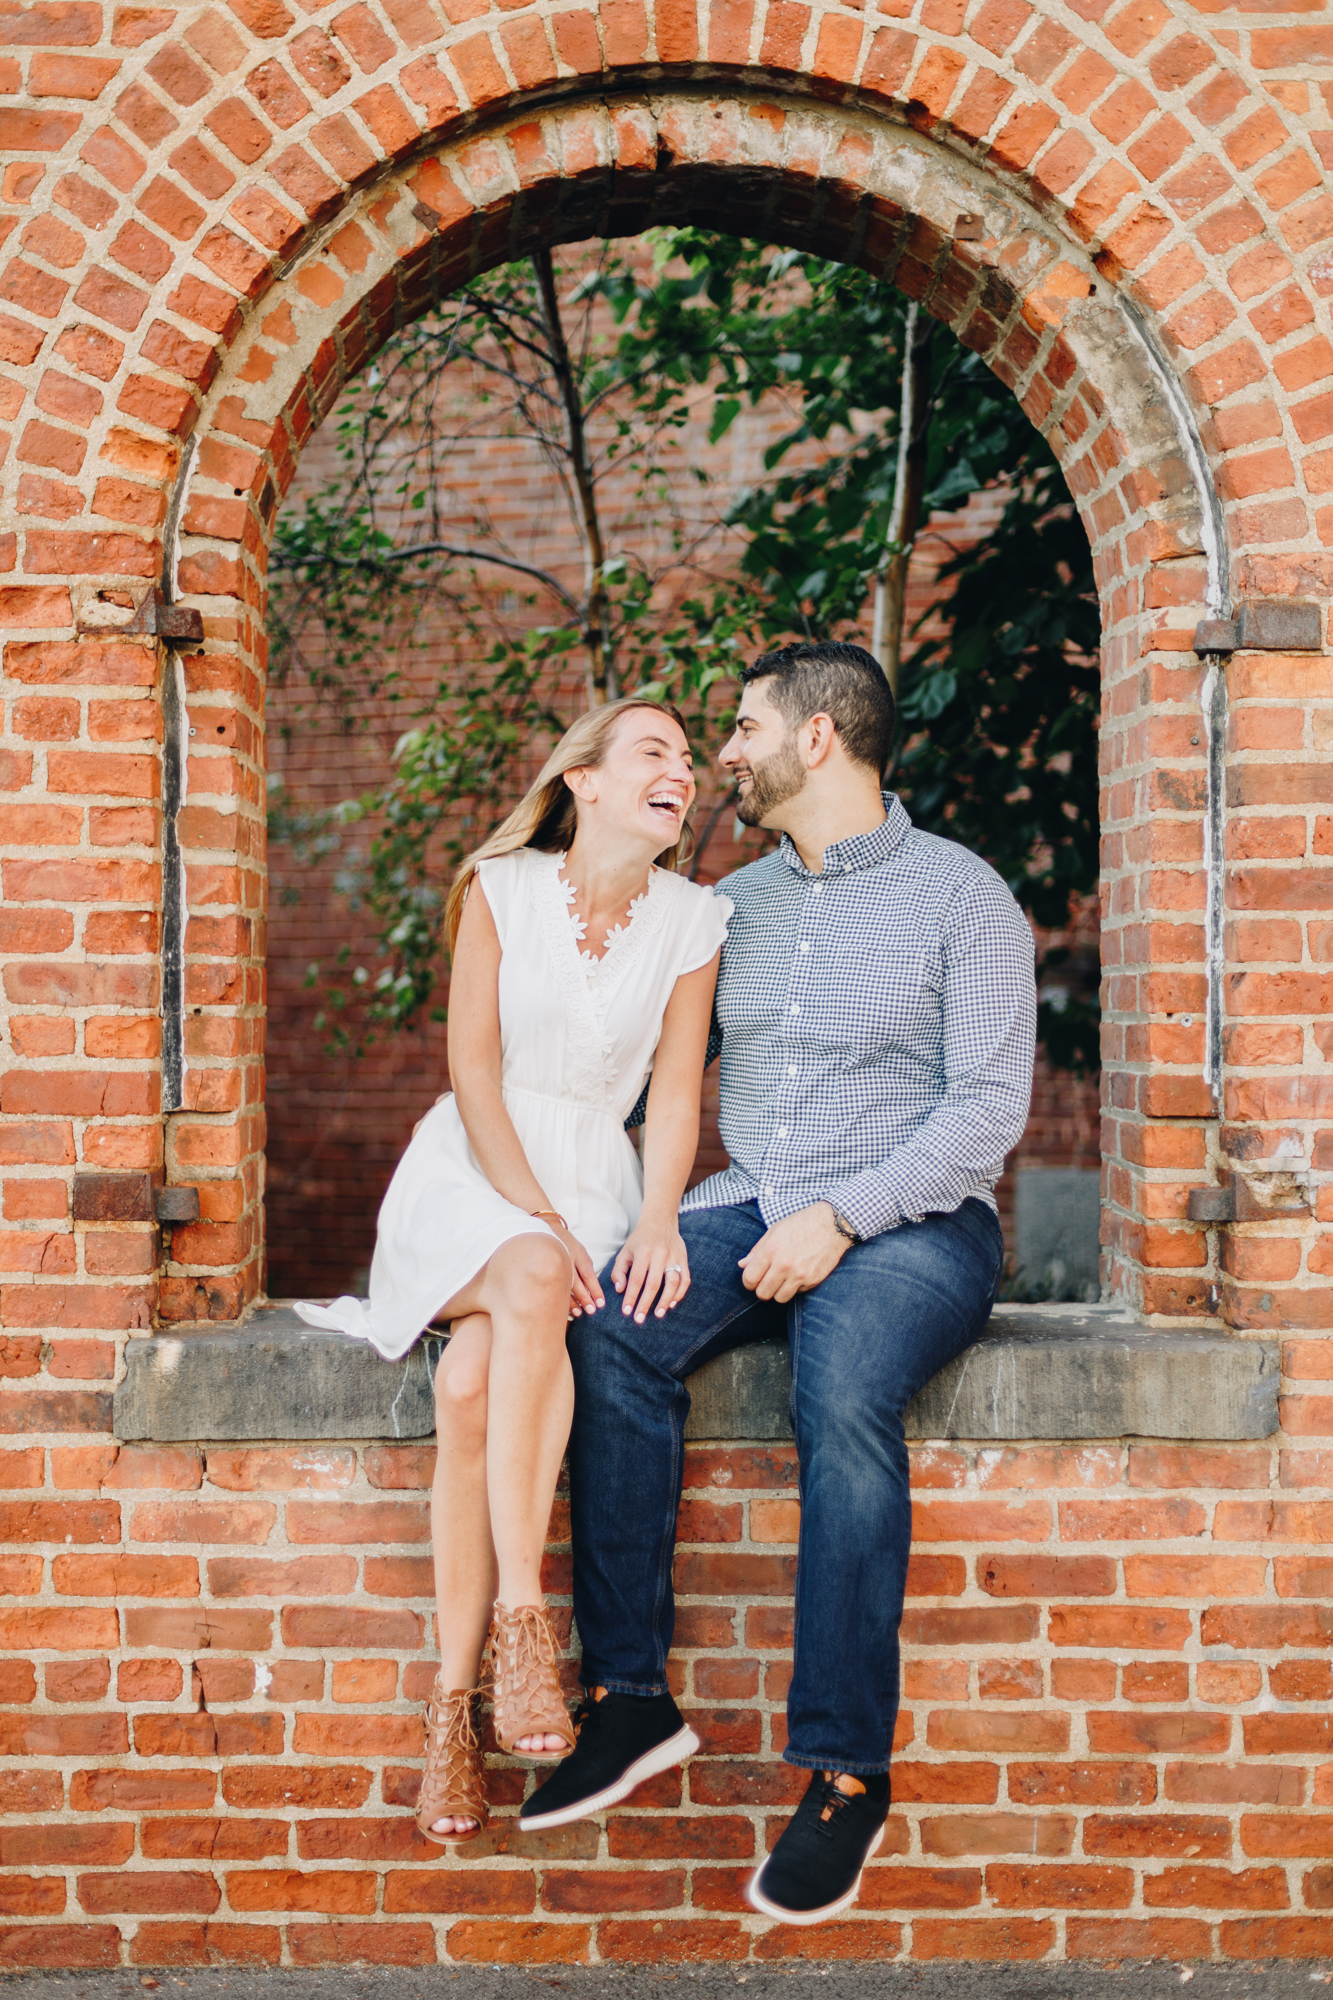 Max Family Garden engagement photos with brick walls